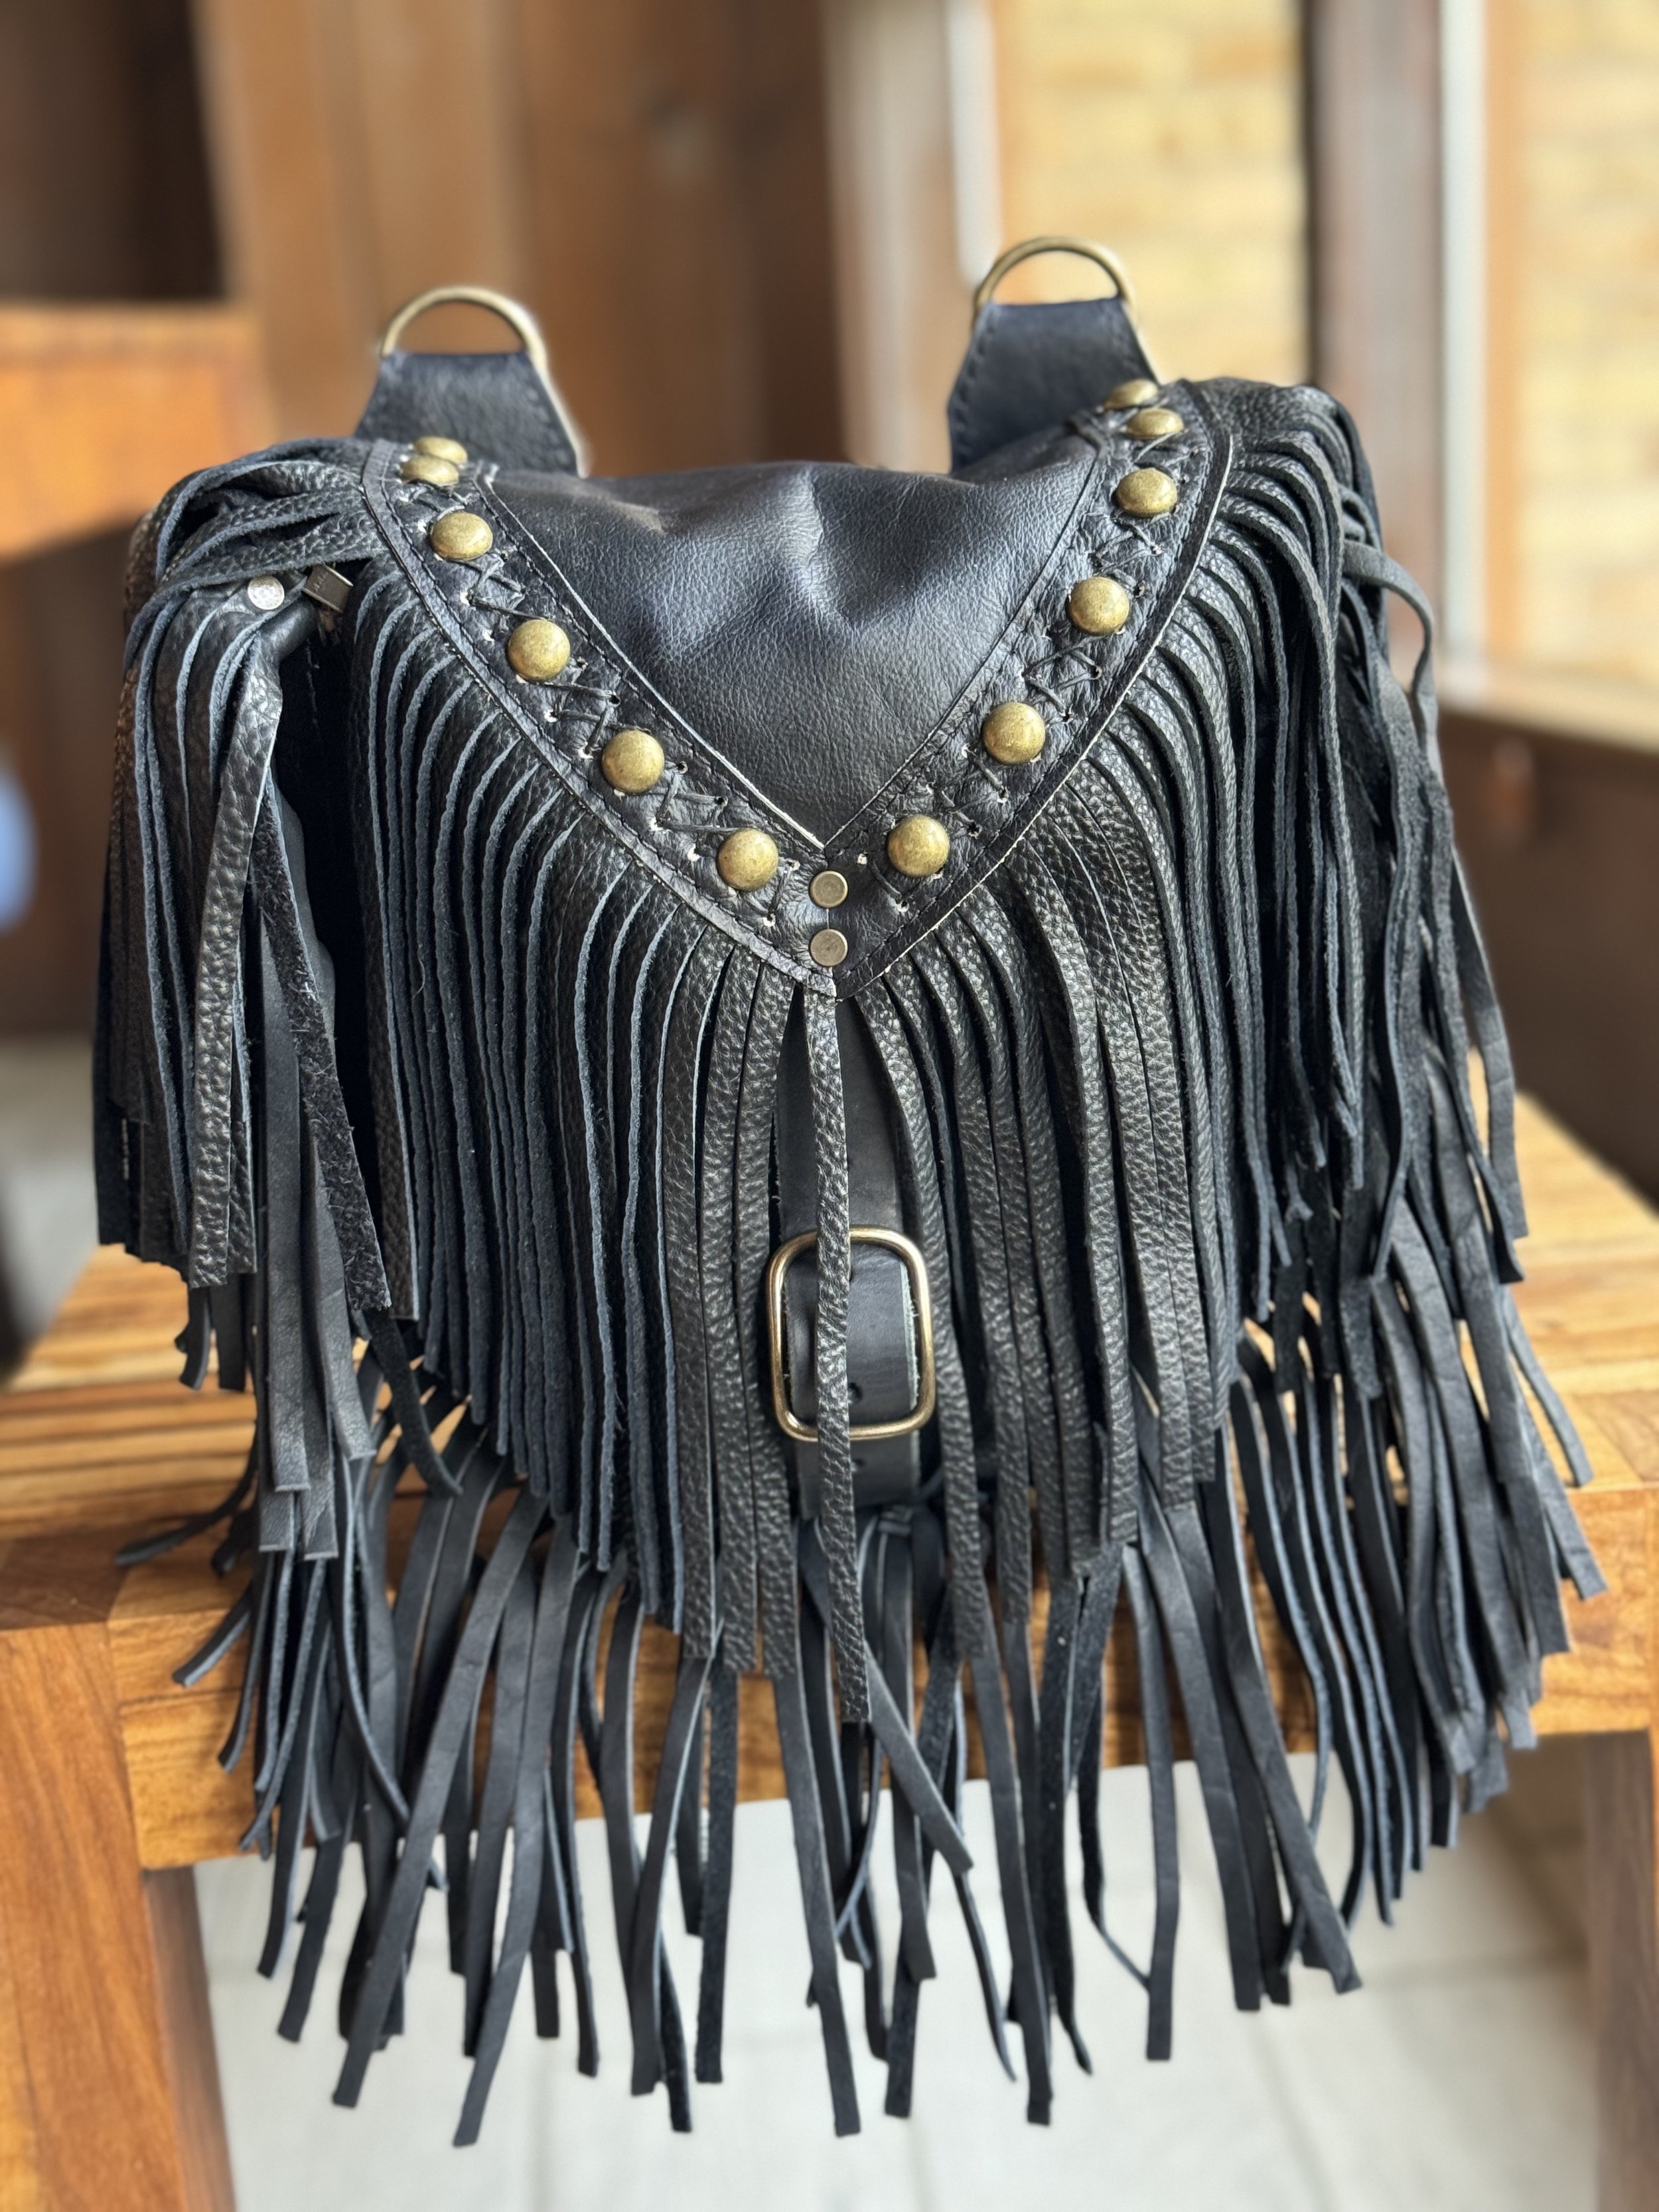 Hand dyed Coal leather, Black bison leather fringe, Antique brass hardware, Studs, Black Criss Cross Handstitching - Mini Brittany Convertible Bag